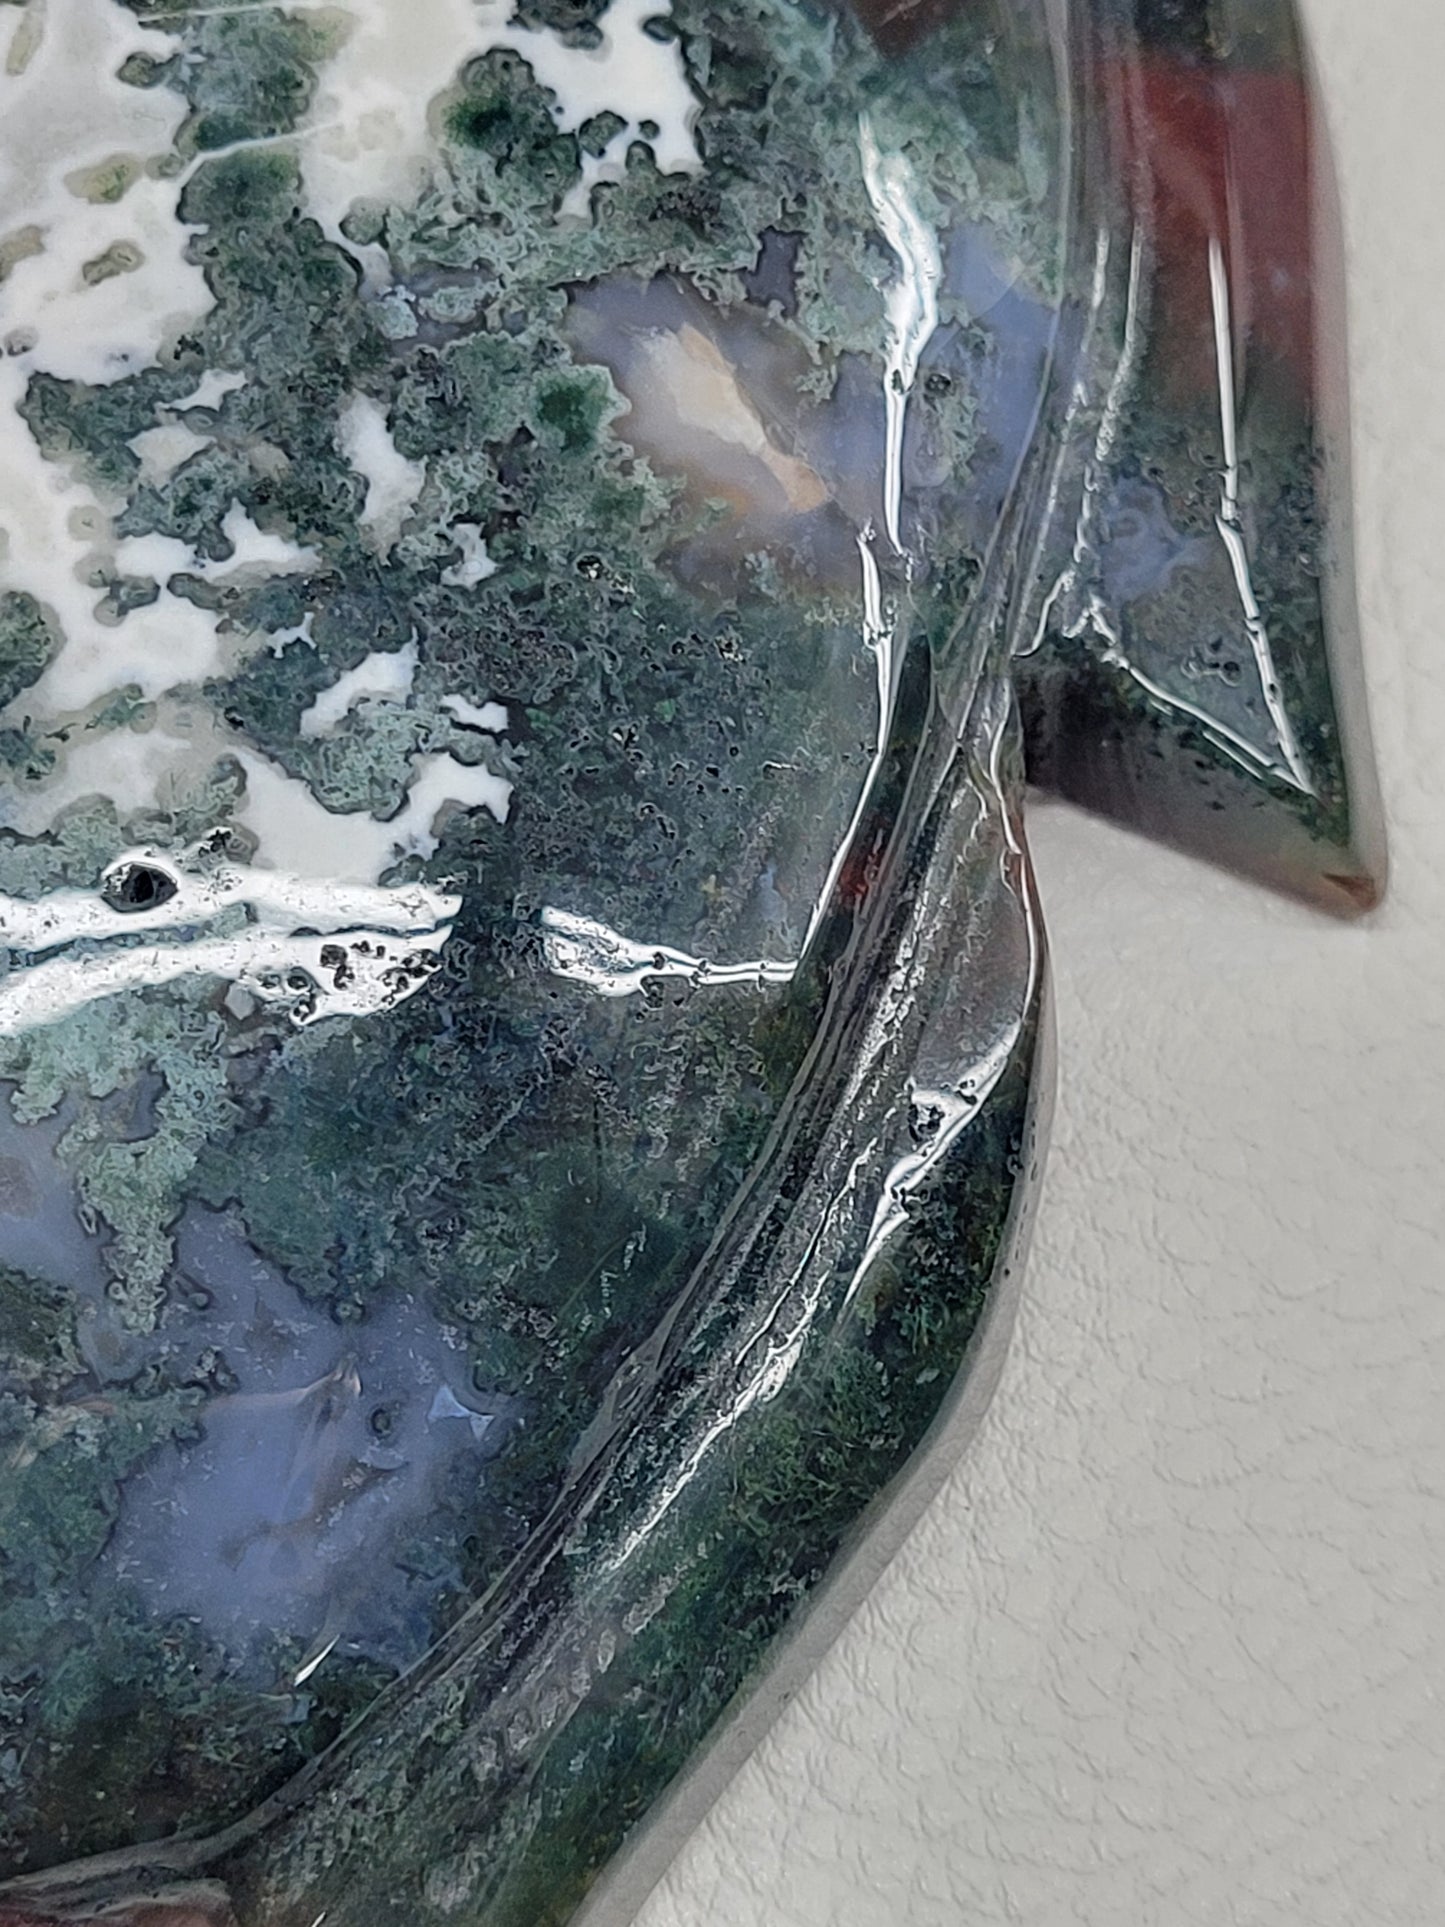 Extra large Moss Agate turtle